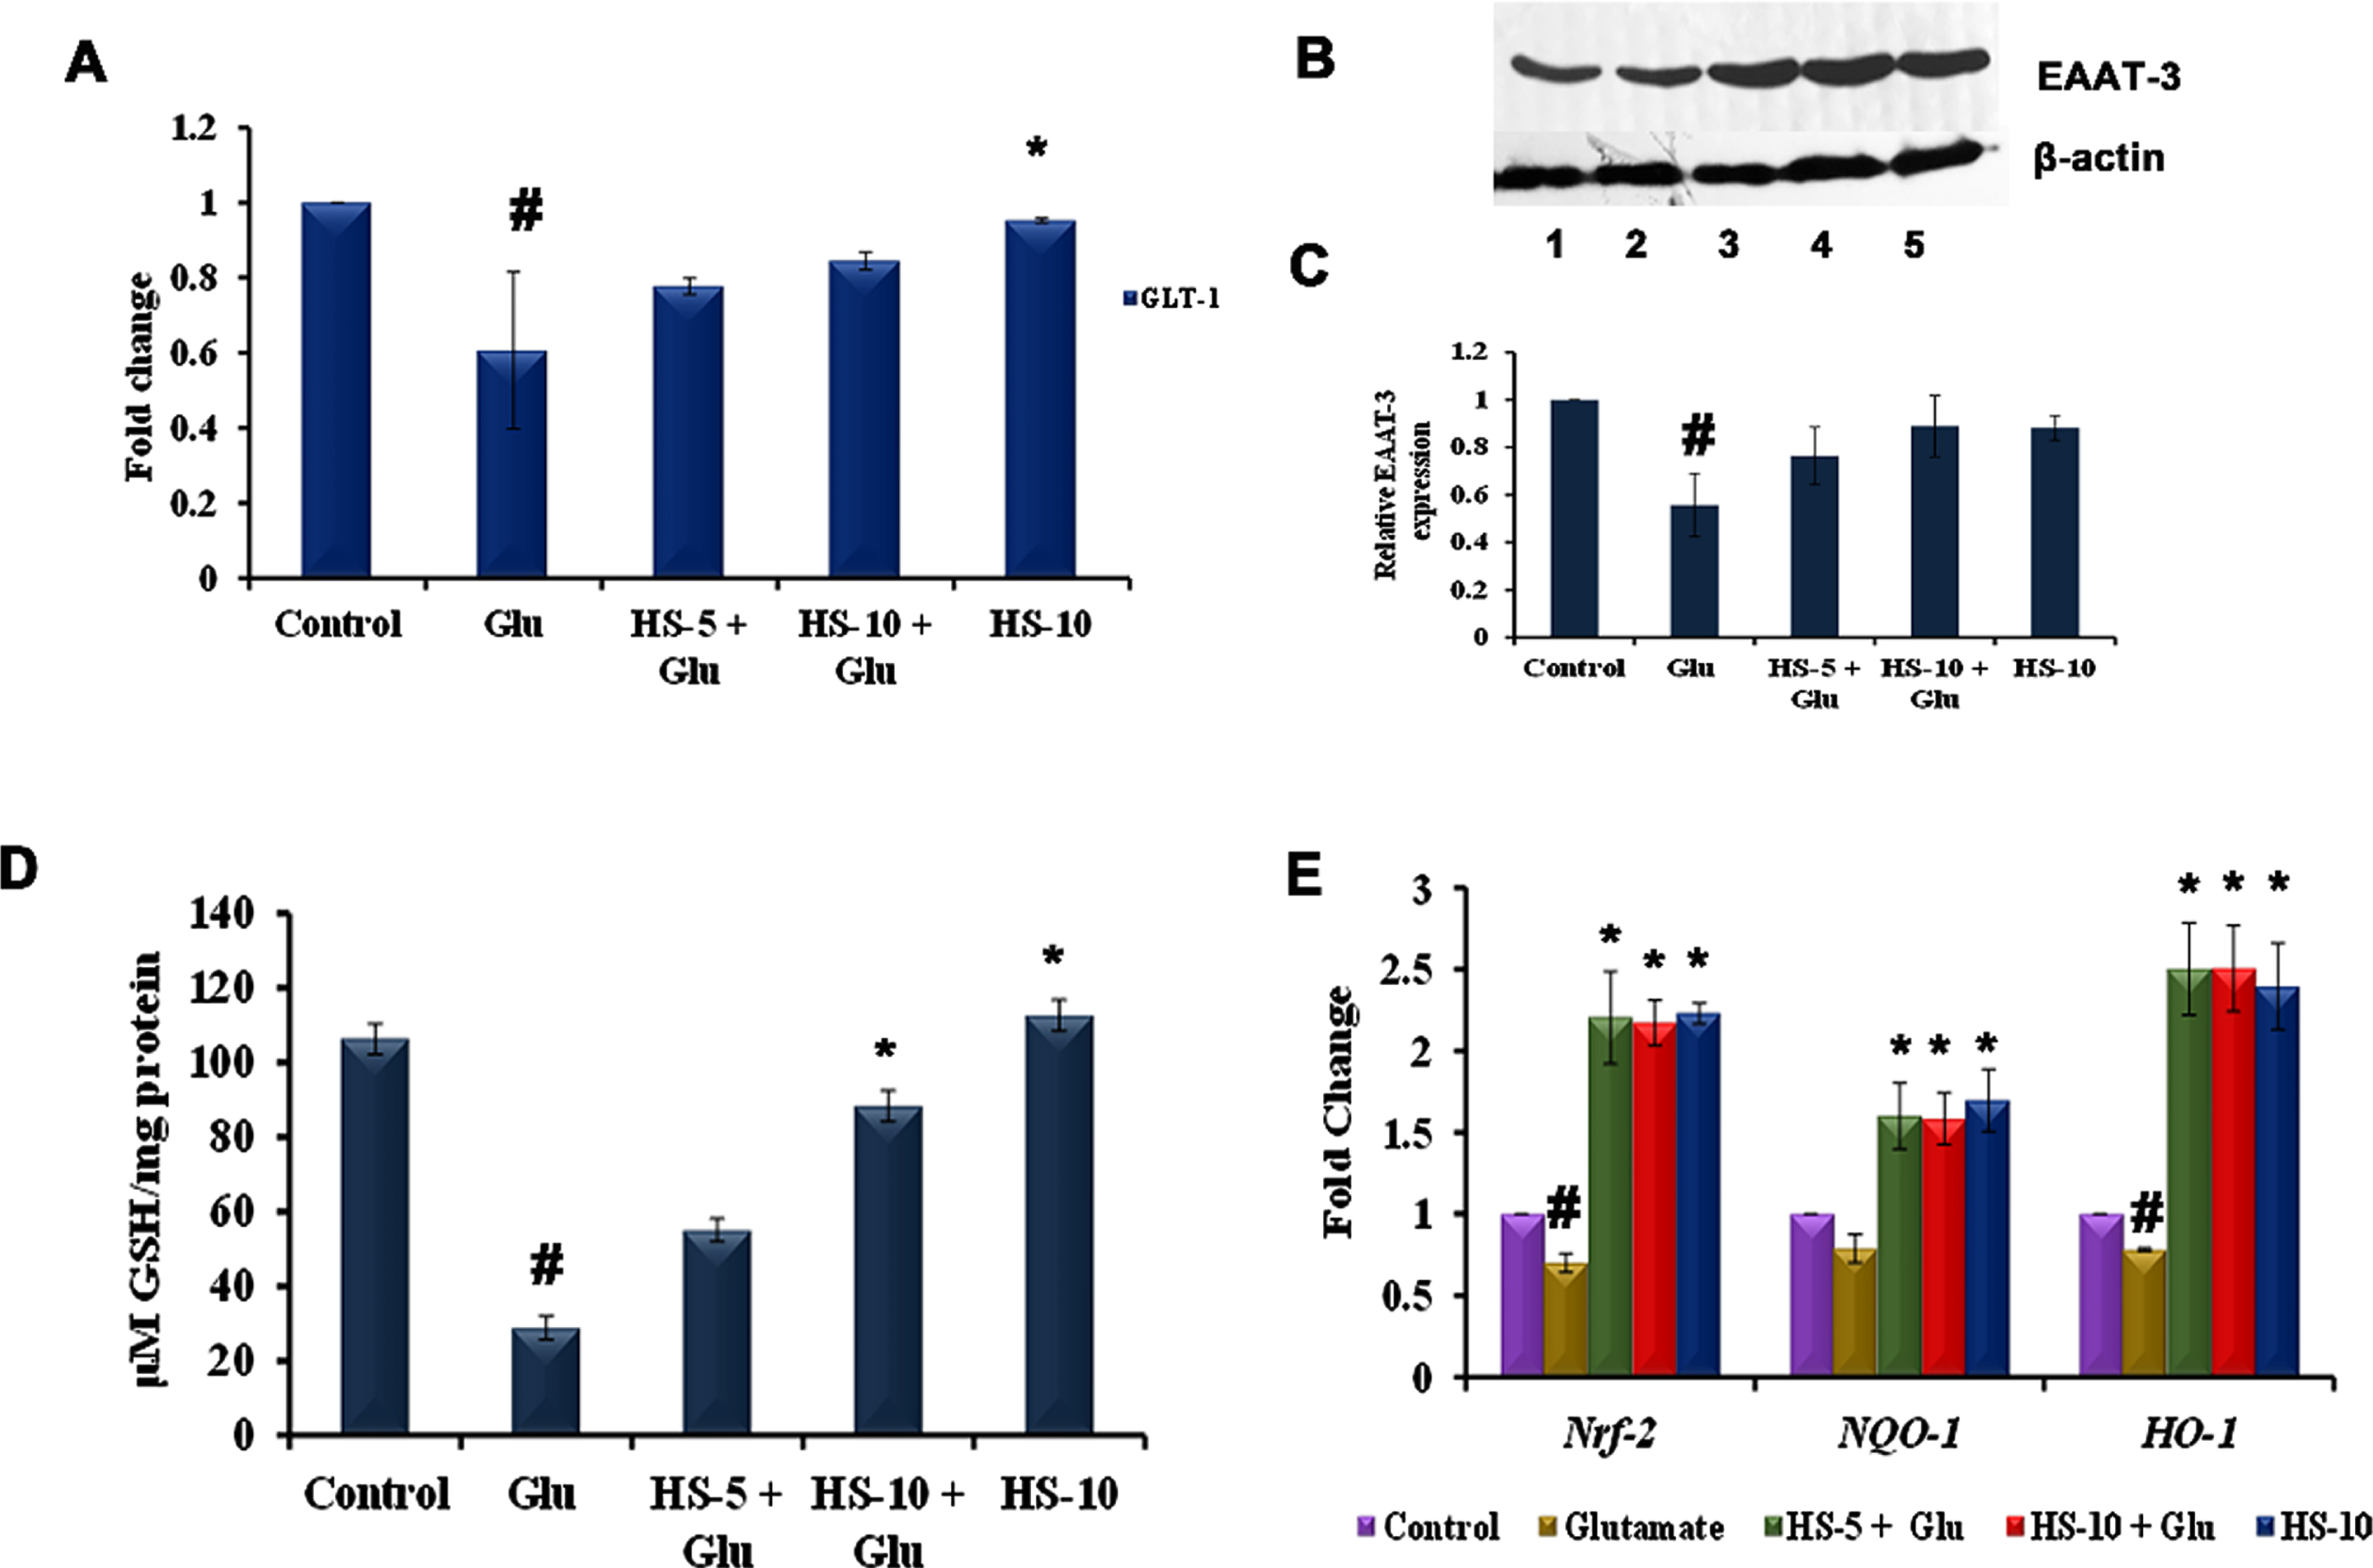 (A) Transcriptional regulation of glutamate transporter GLT-1 by HS (B) Western blot analysis of EAAT-3 (Lane: 1- Control; 2- Glutamate; 3- HS-5 + Glutamate; 4- HS-10 + Glutamate; 5- HS-10) (C) Quantification of EAAT-3 expression (D) Effect of HS on non-enzymatic antioxidant glutathione (E) Transcriptional regulation of antioxidant dependent genes by HS (Significance at p < 0.05; # Control vs Glutamate; * Glutamate vs HS treated; n = 3).